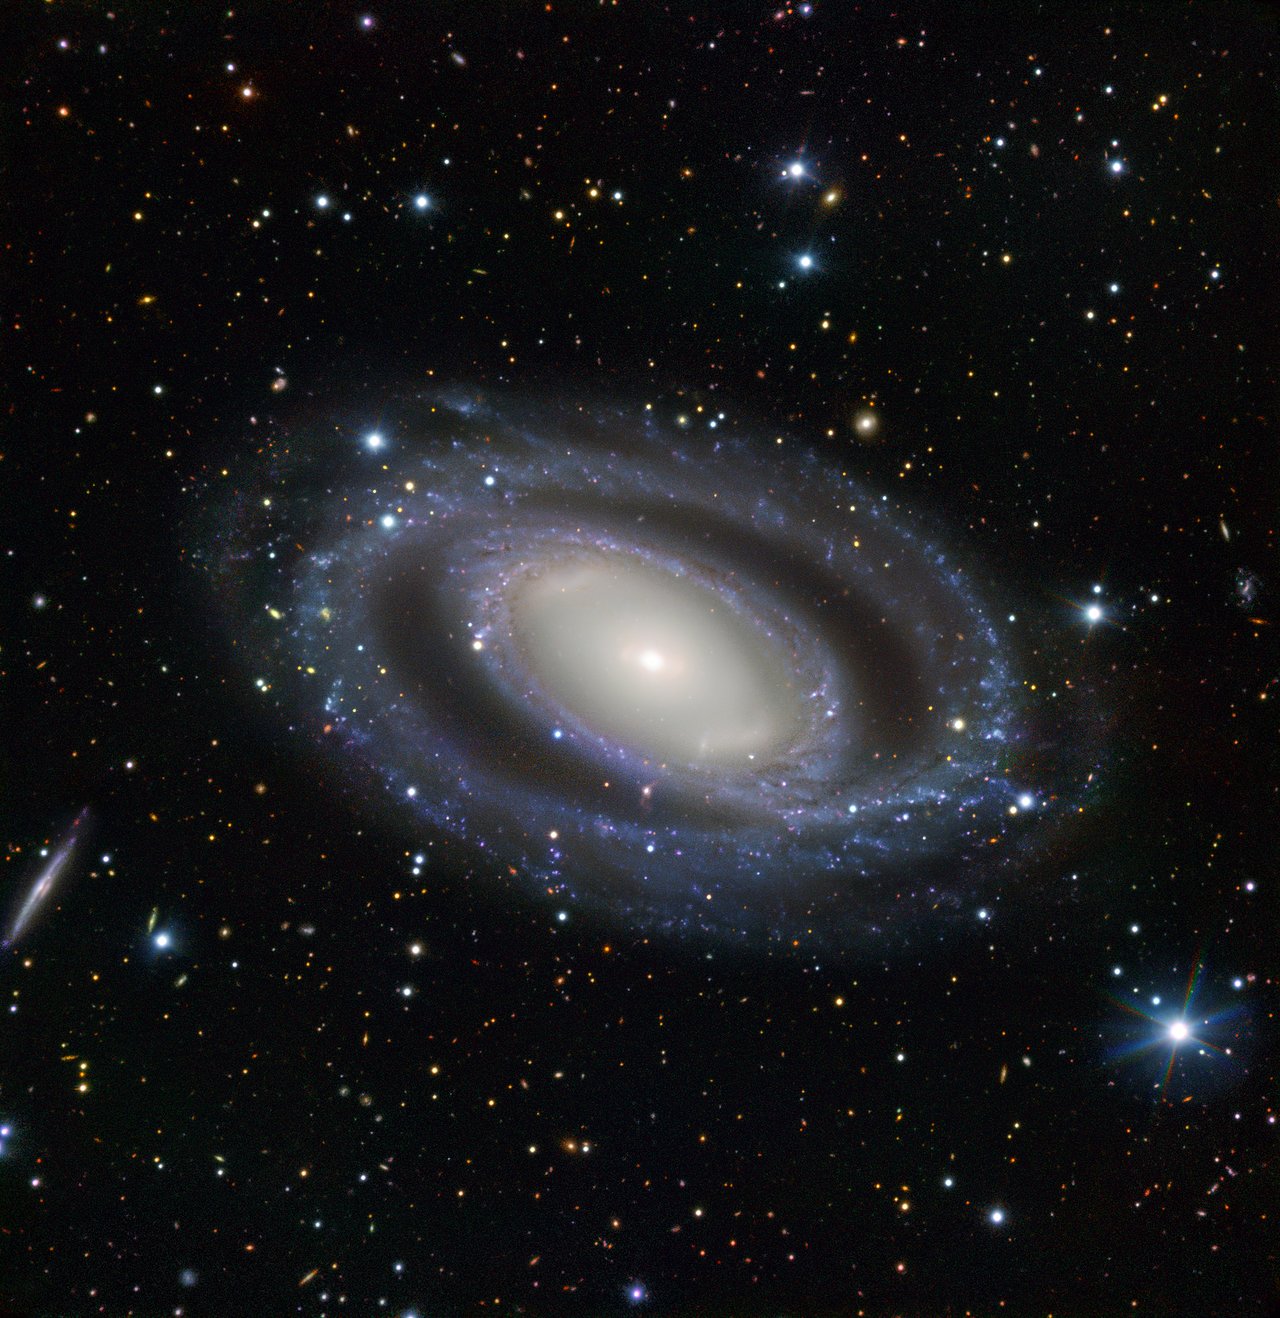 The double-wound spiral galaxy ngc 7098.